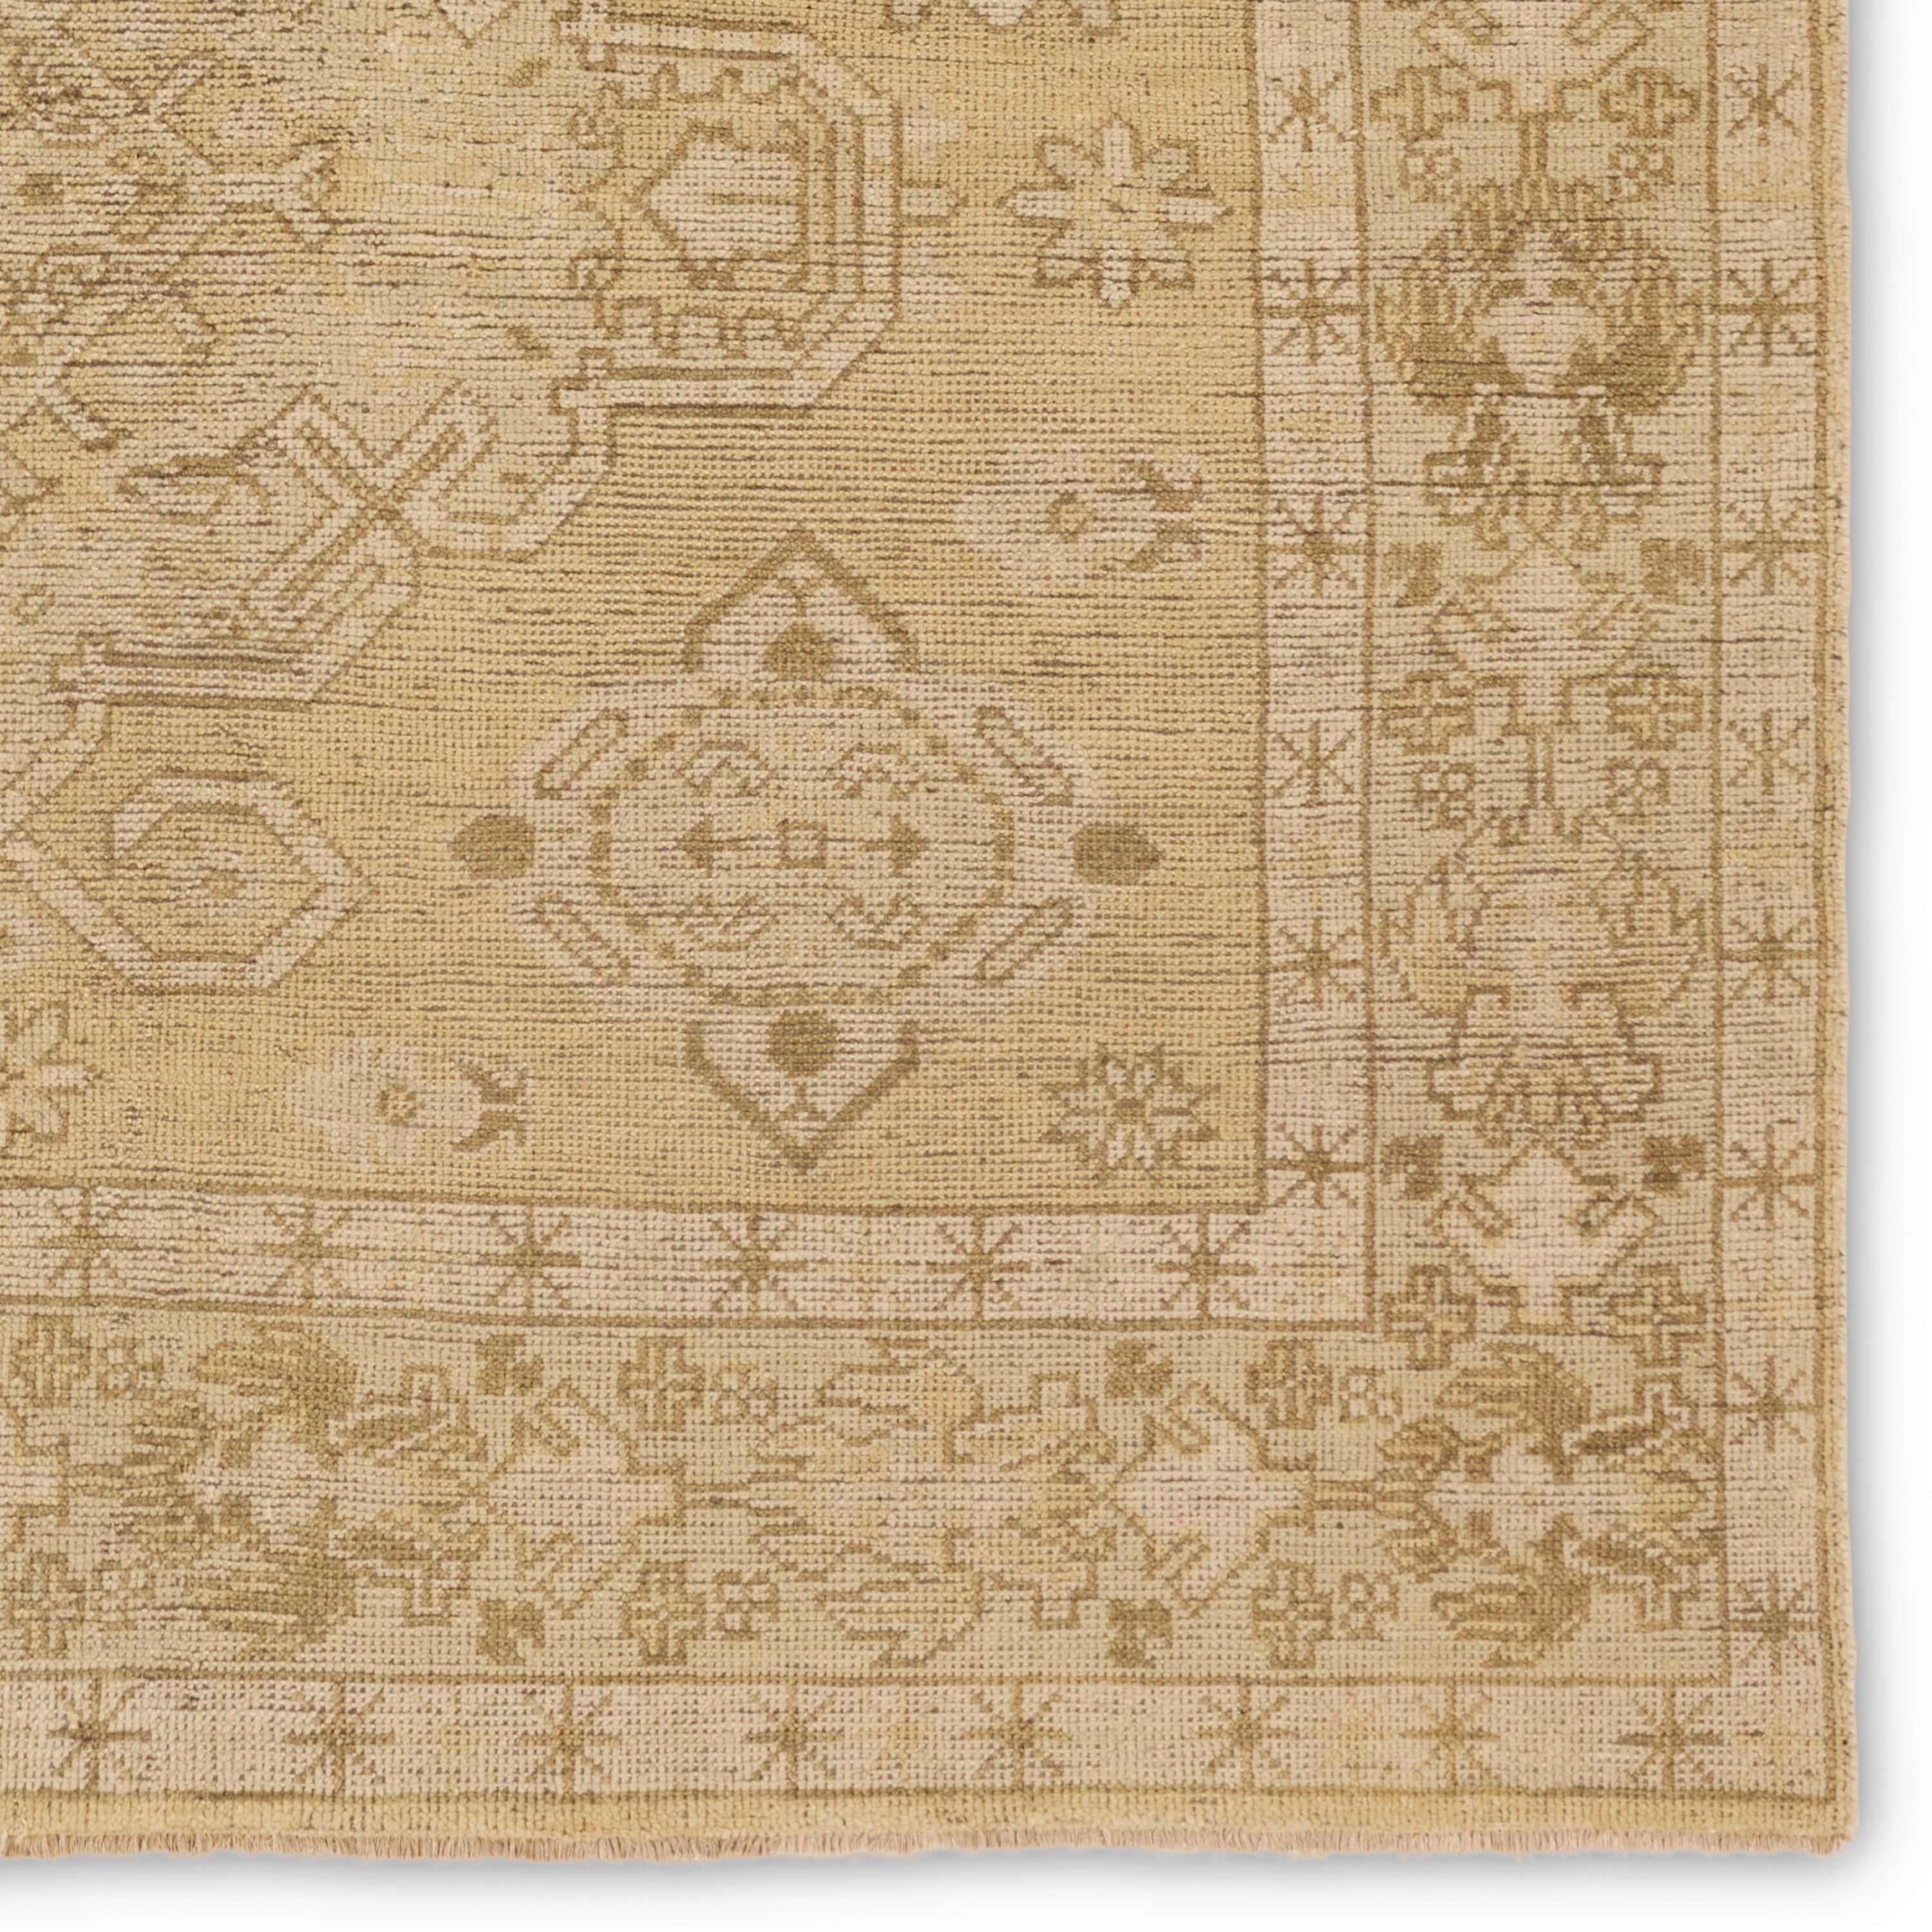 The Rhapsody collection features heirloom-quality designs of stunningly abrashed Old World patterns. The Folklore area rug boasts a beautifully washed medallion motif with a decorative border. The khaki tones are accented with cream and taupe hues for added depth and intrigue. This durable wool handknot anchors living spaces with a fresh take on vintage style. Amethyst Home provides interior design, new construction, custom furniture, and area rugs in the Scottsdale metro area.